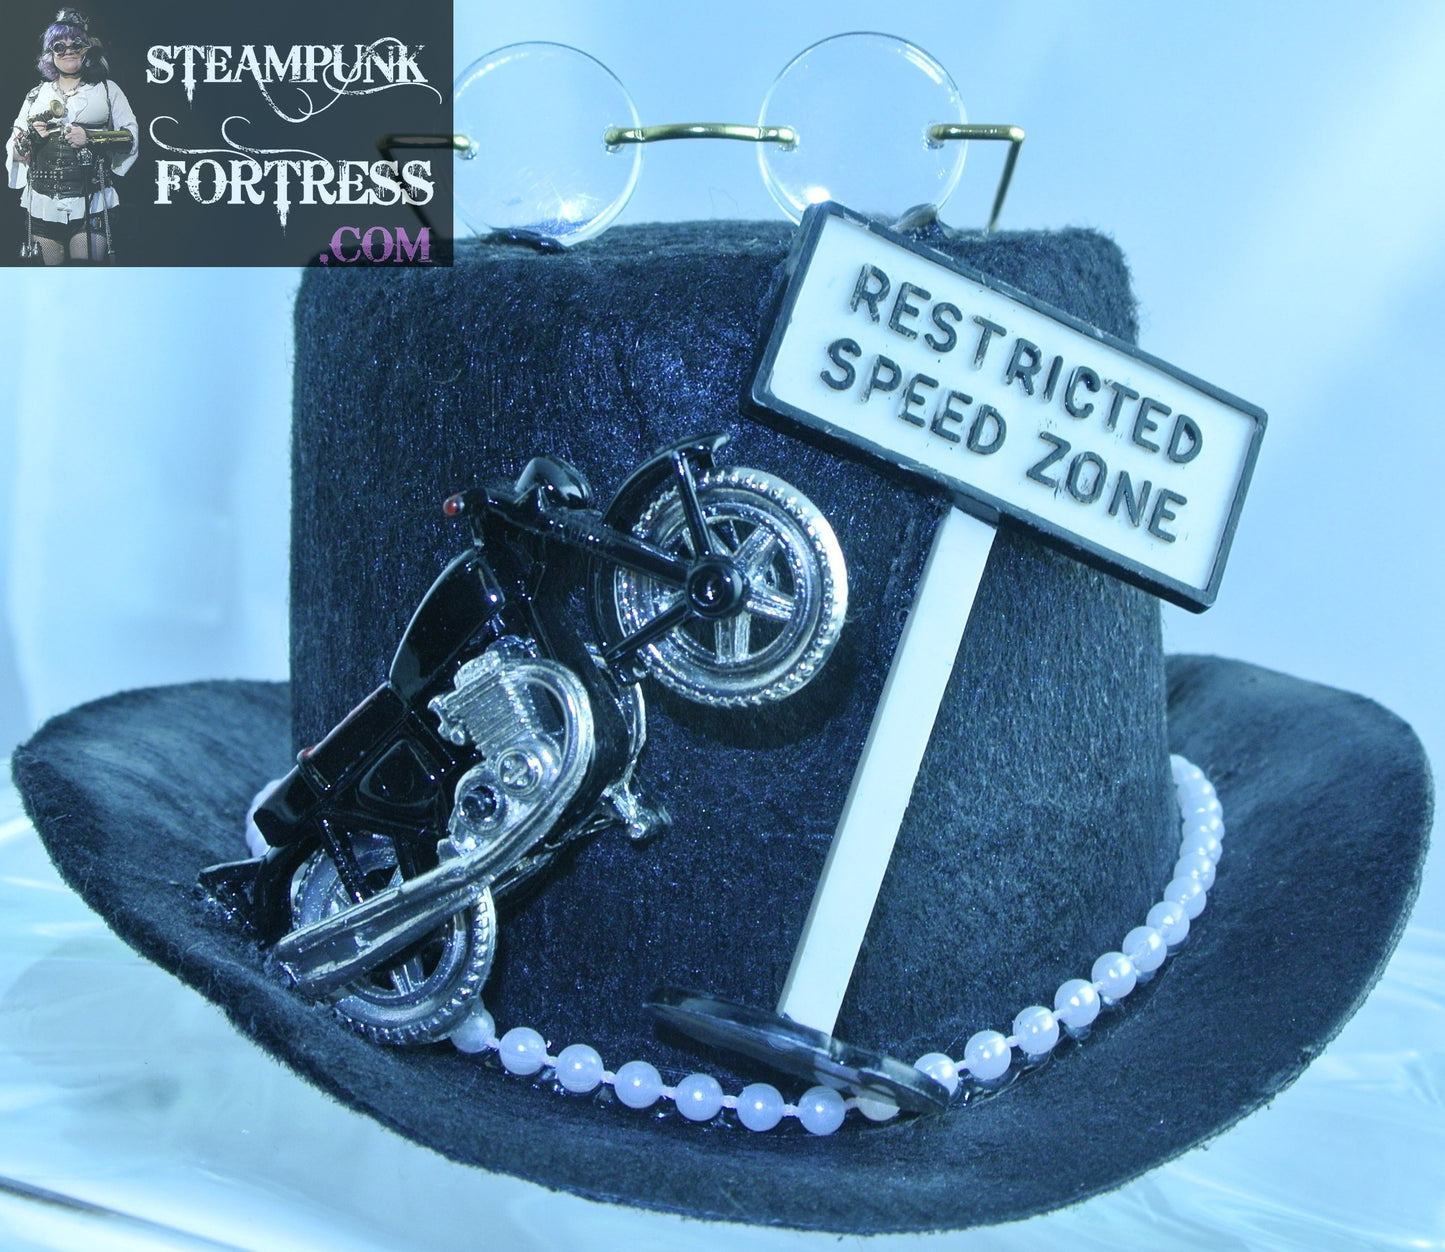 BLACK MOTORCYCLE ACCIDENT RESTRICTED SPEED ZONE SIGN GLASSES ON TOP PEARL RIBBON BAND MEDIUM MINI TOP HAT STORY STARR WILDE STEAMPUNK FORTRESS